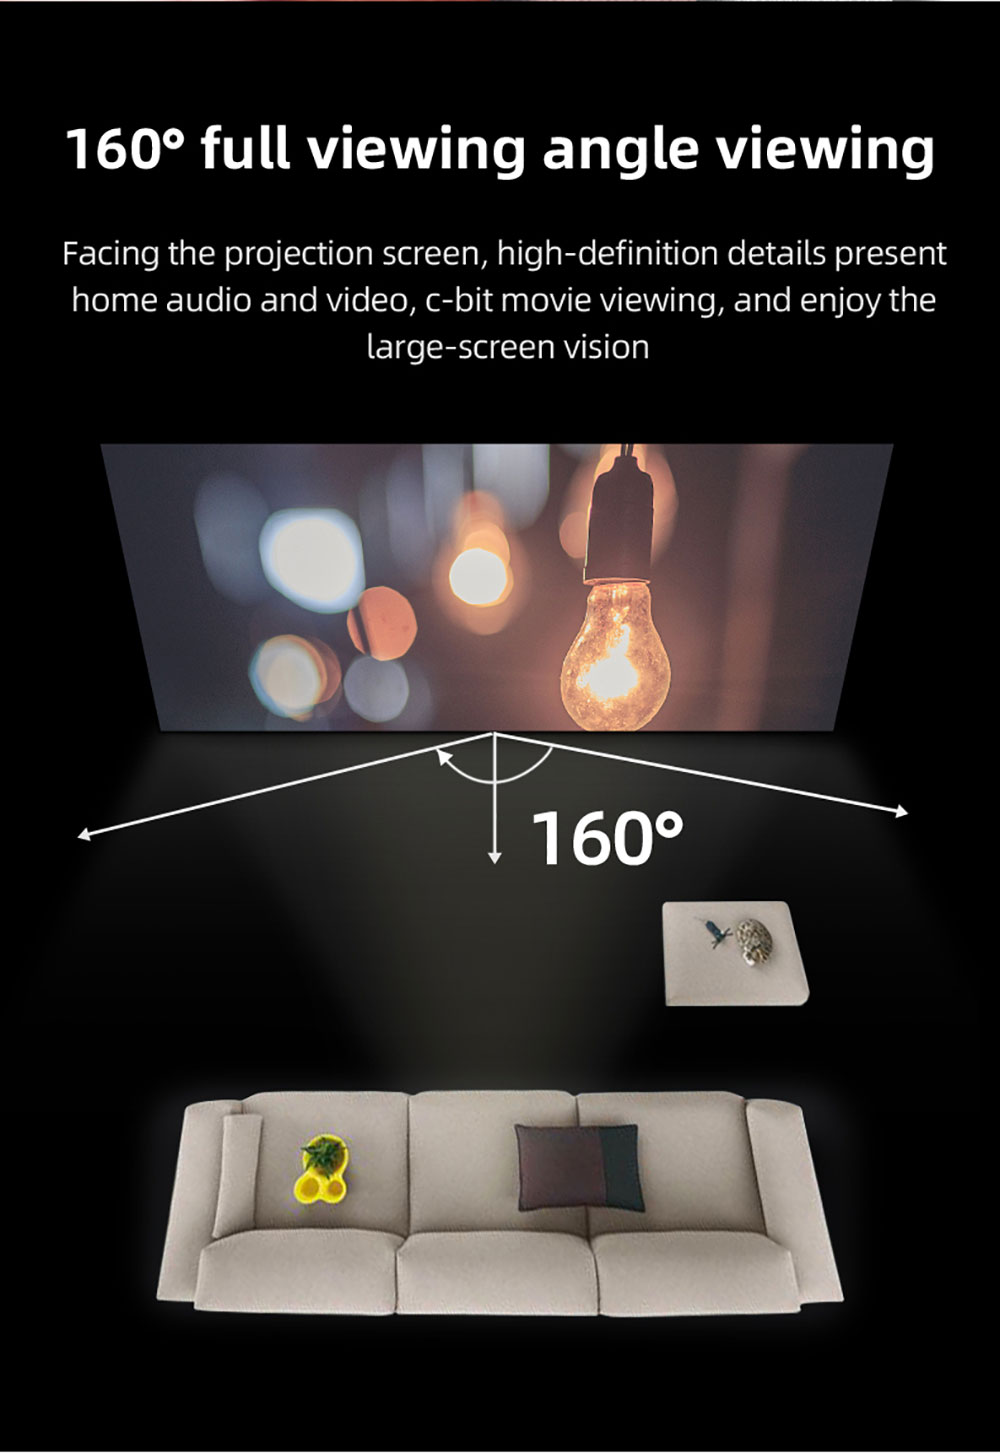 VEIDADZ Wall Hanging Projector Screen 4K HD Anti-light White Grid Screen 72inch 160° Full Viewing 16:9 Anti-wrinkle Waterproof Home Theater Projection Curtain